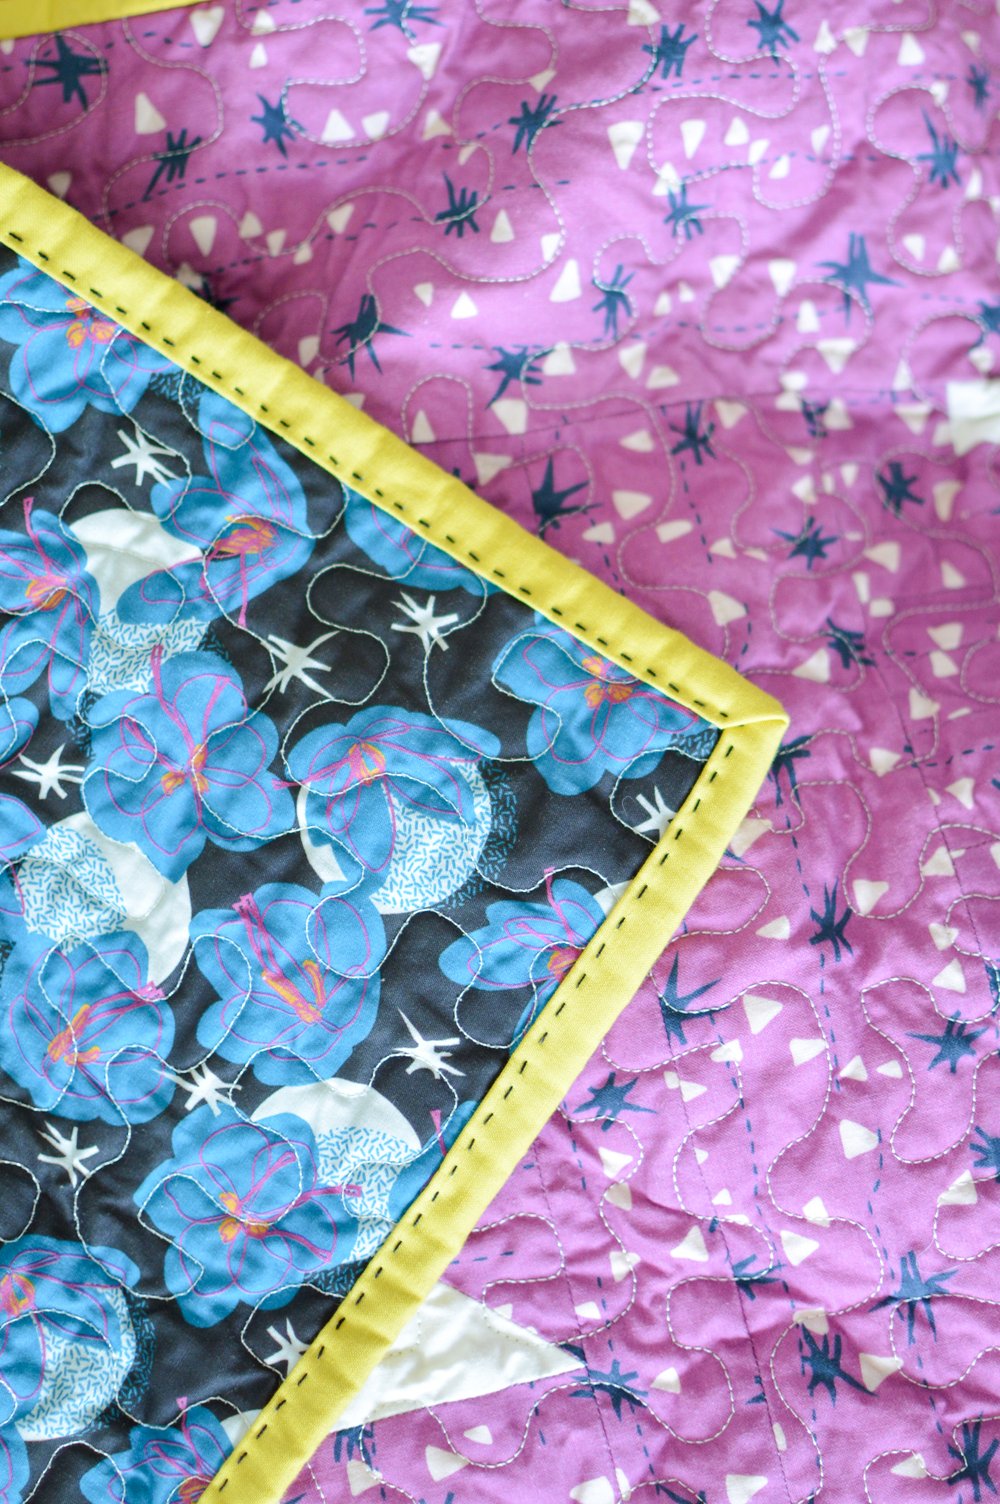 Make a Throw Quilt for Your Home with this Simple Quilt Project